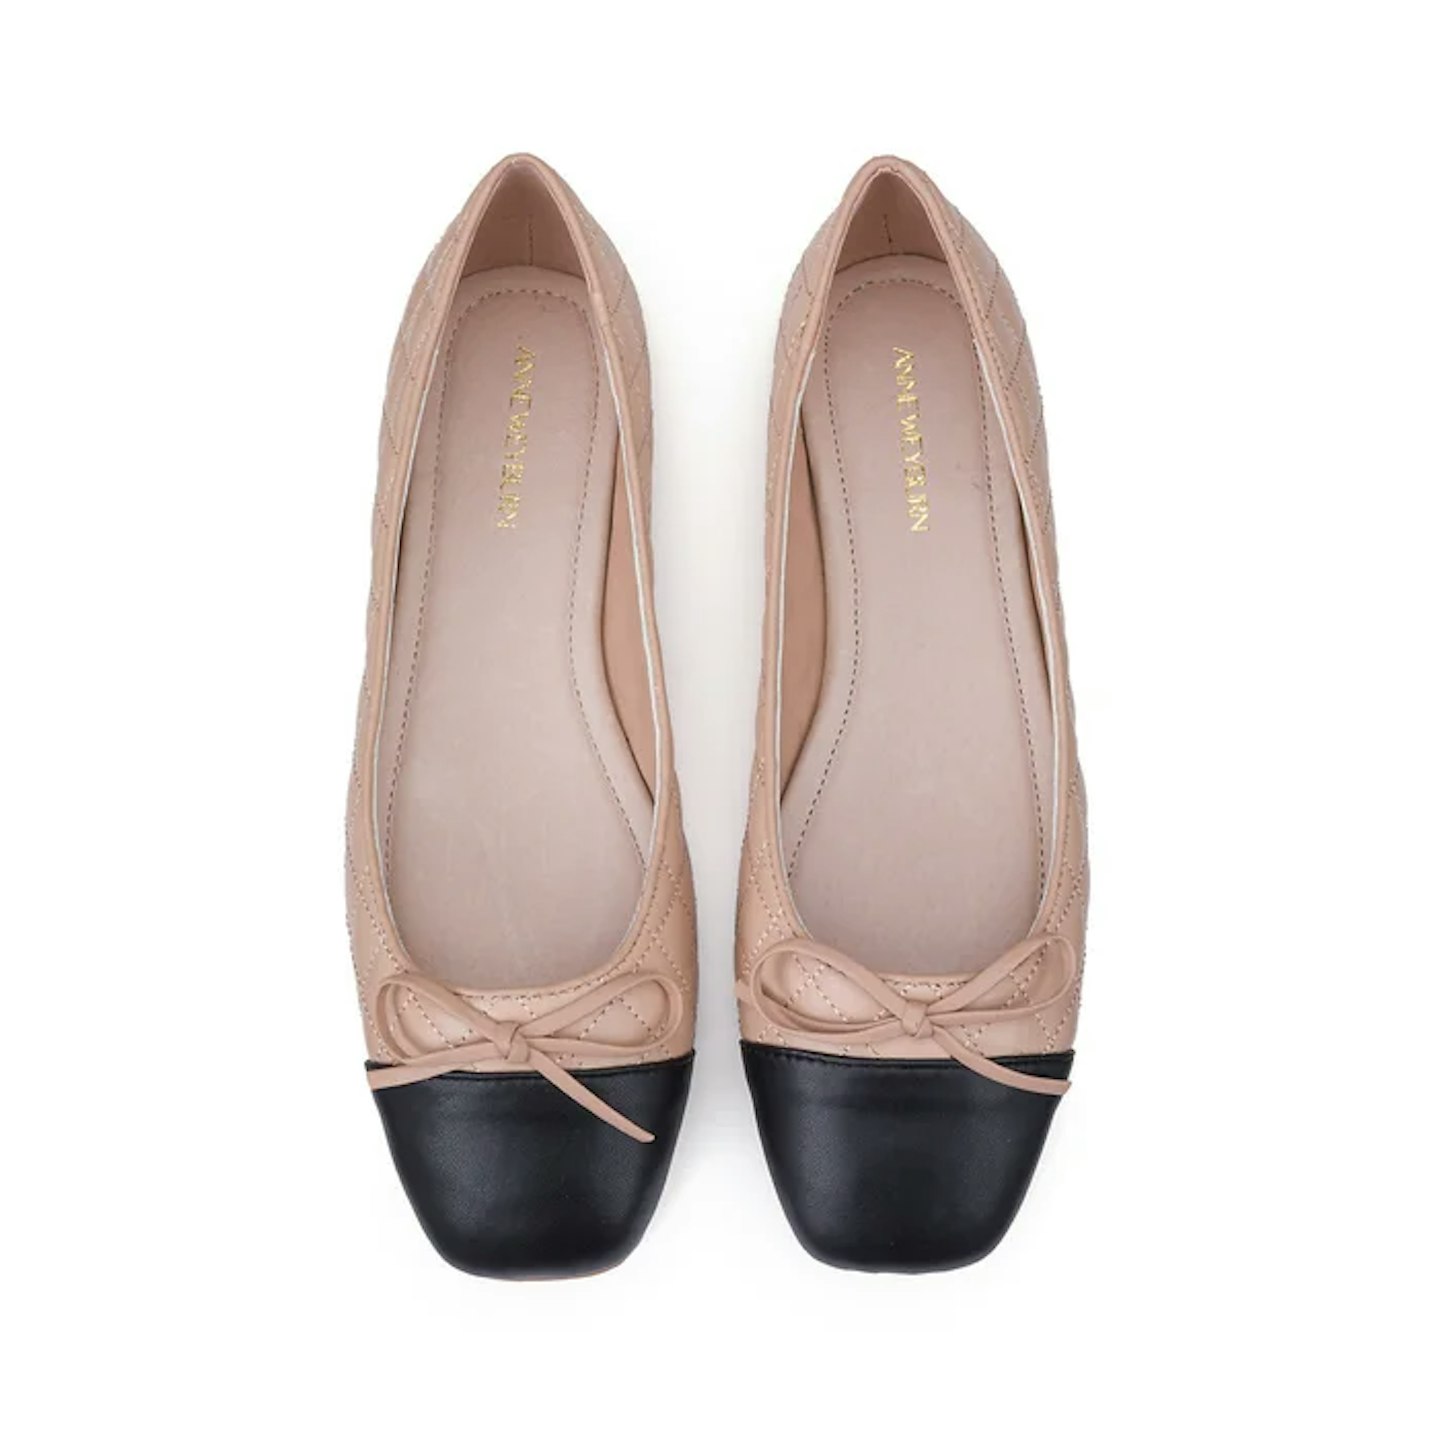 The Best Designer Flats Out There!